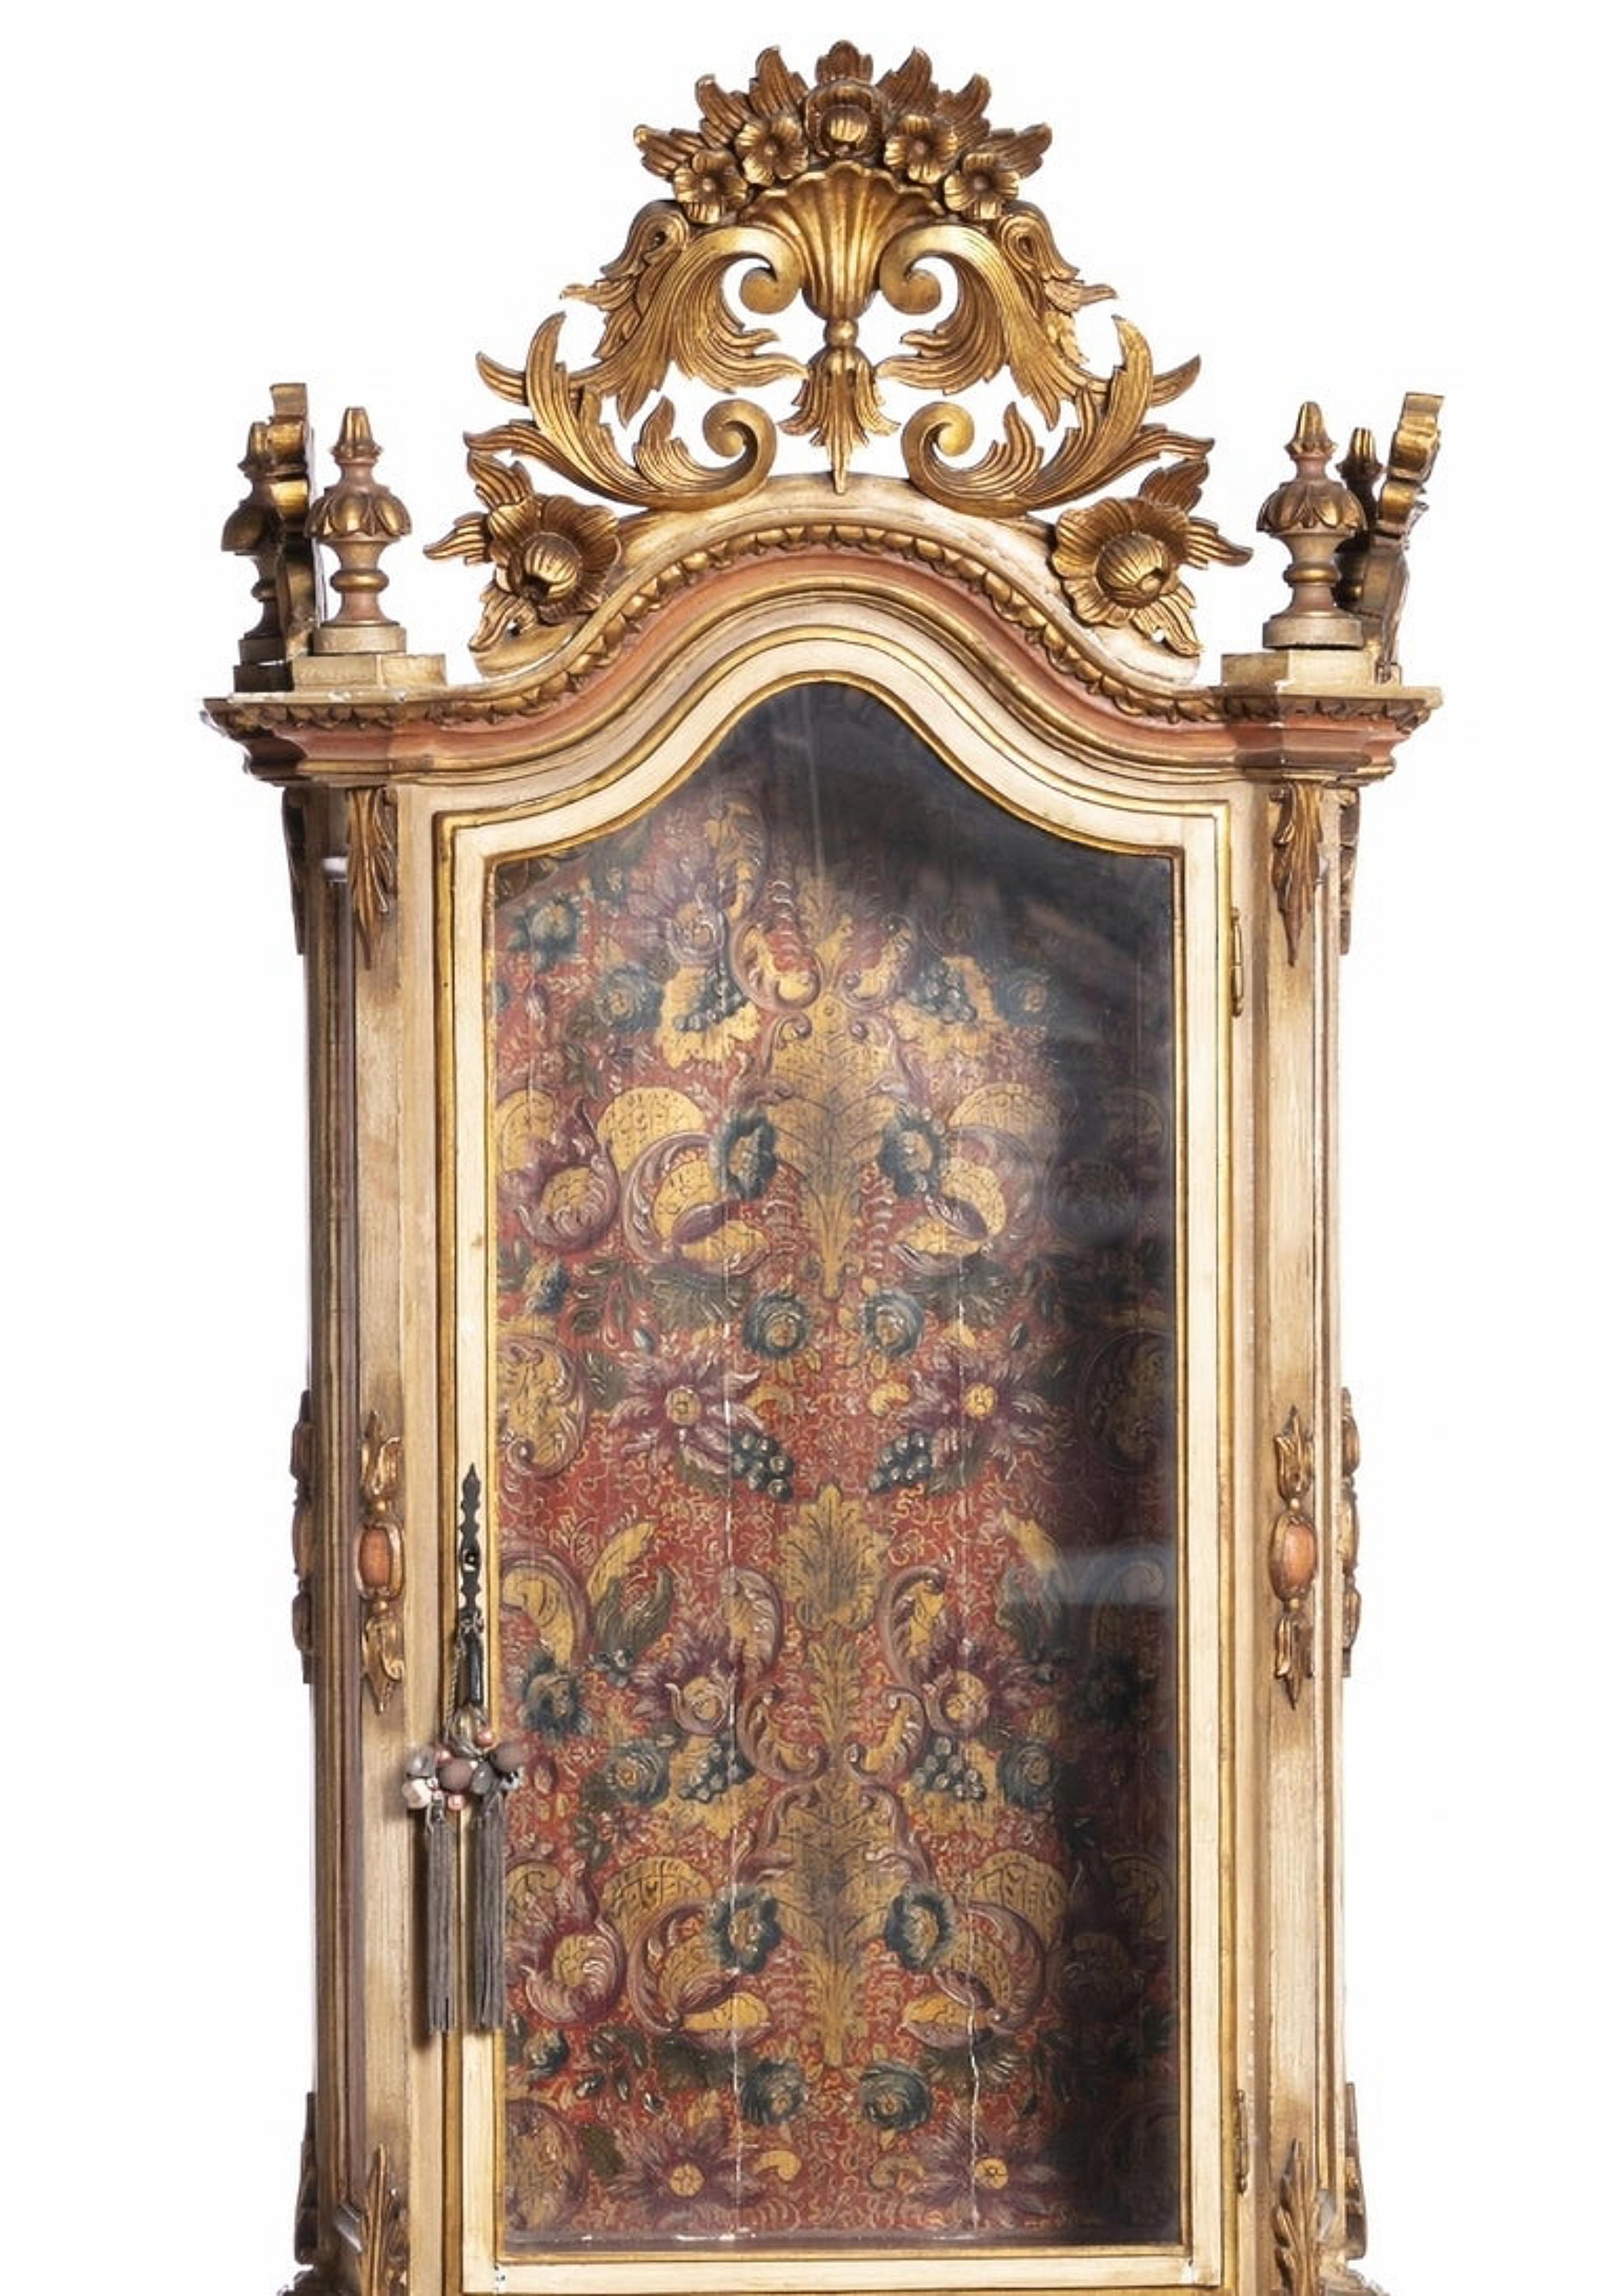 Oratory
Portuguese, 19th century
in painted, gilded and carved wood, with glazed door and sides. 
Sitting on a back base, with a door decorated with a gallant scene. 
Painted interior with profuse plant decoration. S
mall flaws. 
Dim.: 204 x 75 x 42